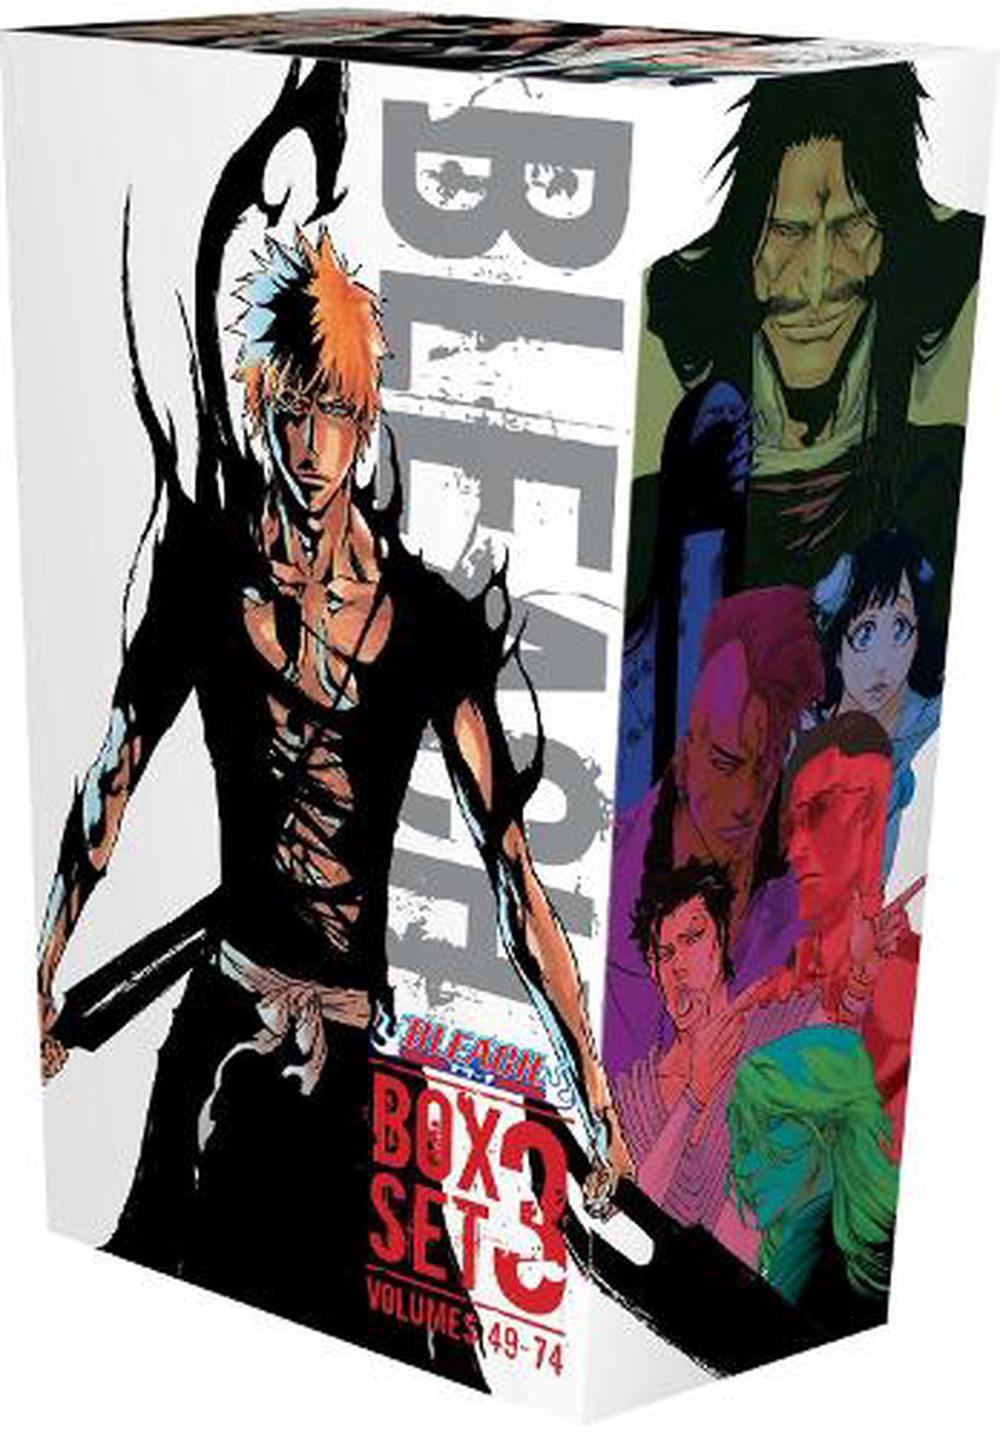 BLEACH: The Official Anime Coloring Book, Book by VIZ Media, Official  Publisher Page